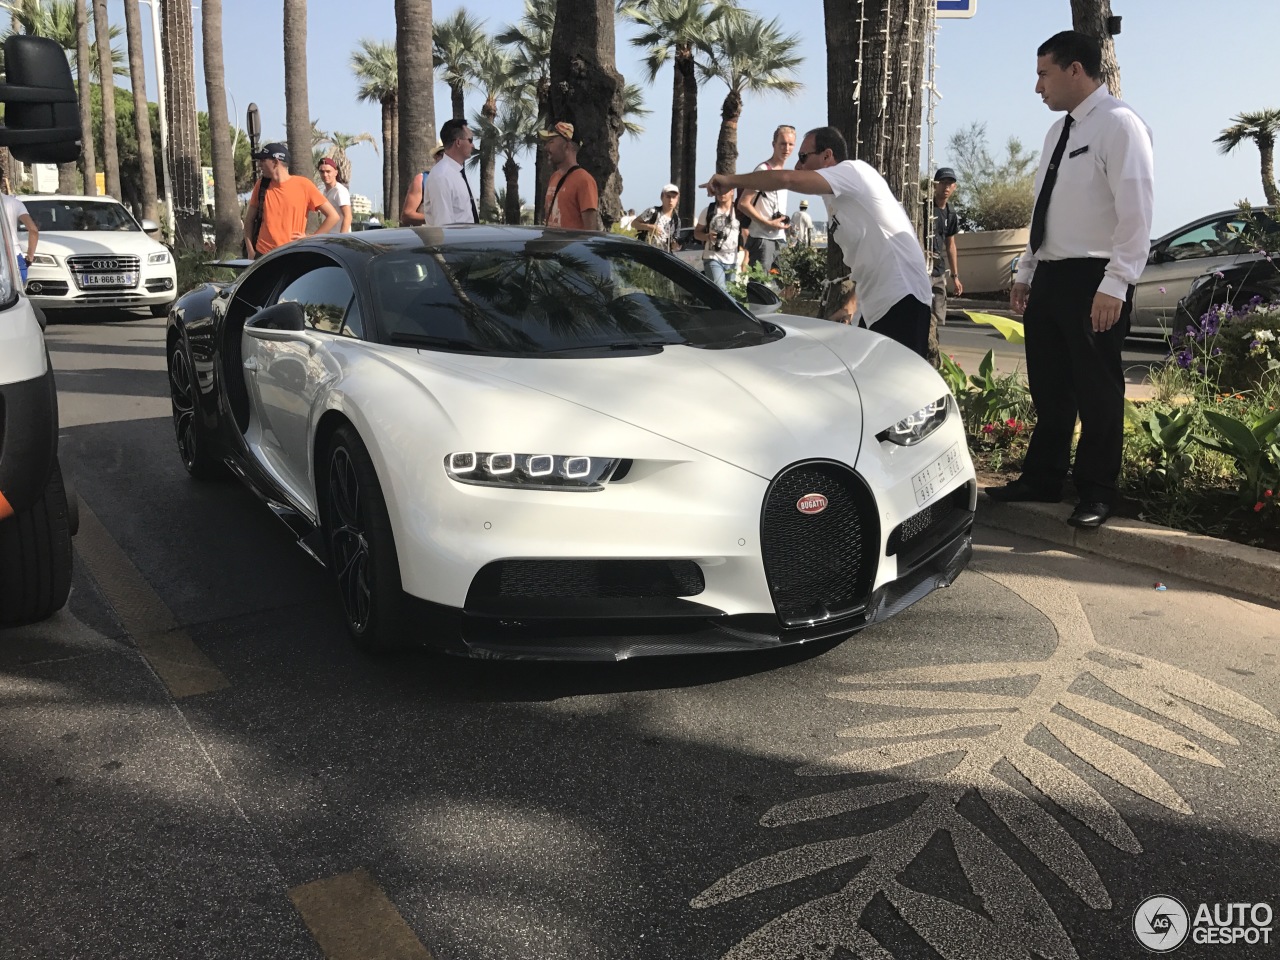 bao drake s easter surprise makes kylie jenner s dream come true with rare bugatti chiron pur supercar 653a412522d2e Drake's Easter Surprise Makes Kylie Jenner's Dream Come True With Rare Bugatti Chiron Pur Supercar